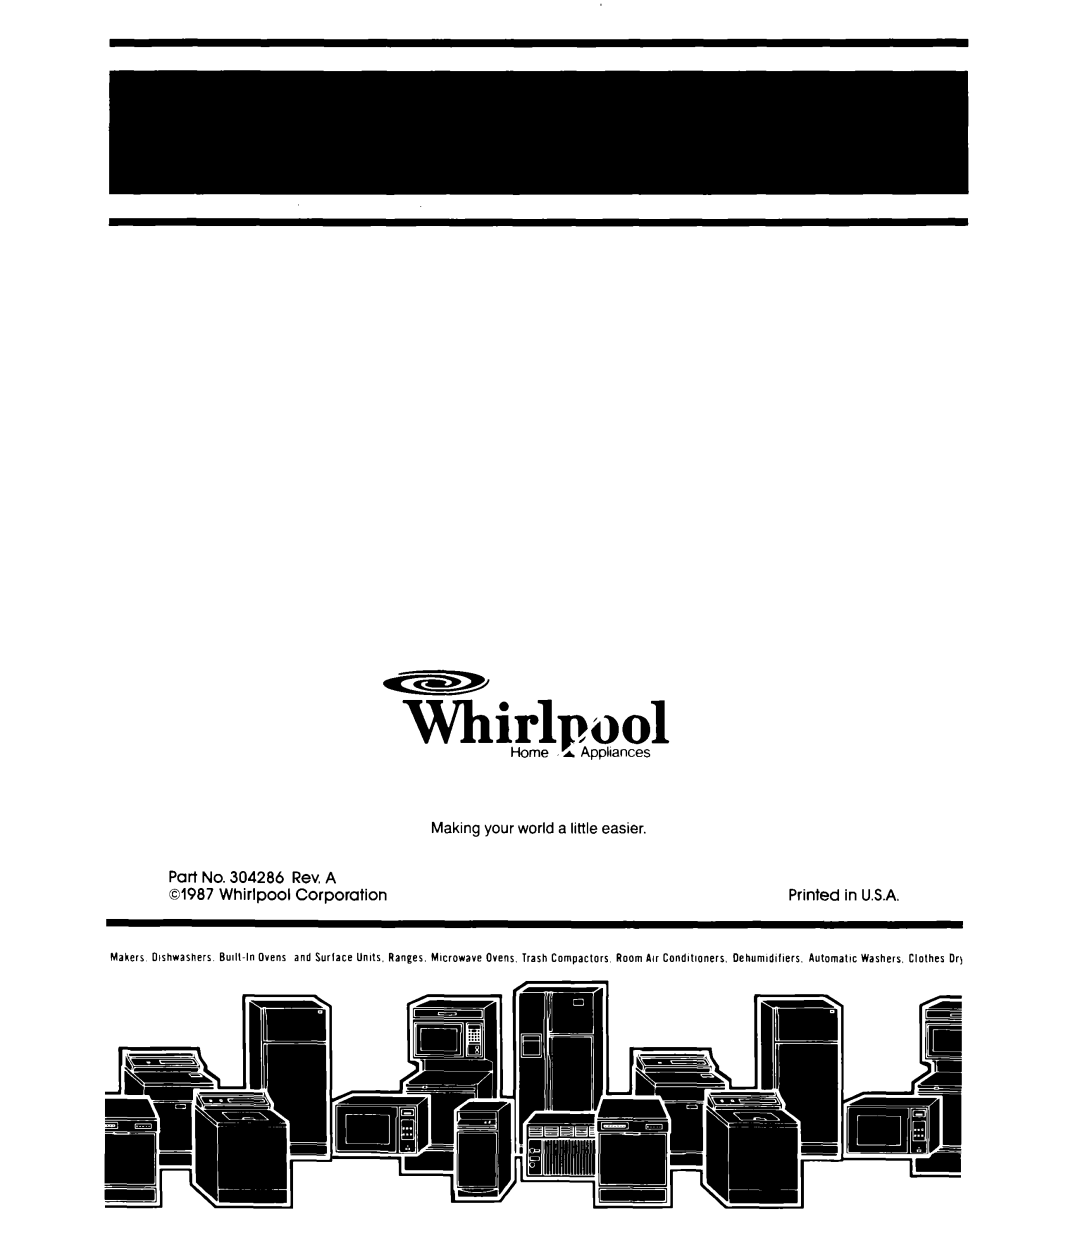 Whirlpool DU2000XS manual TKirlpool, Making your world a little easier, Part No. 304286 Rev. A, Printed, in U.S.A, 01987 